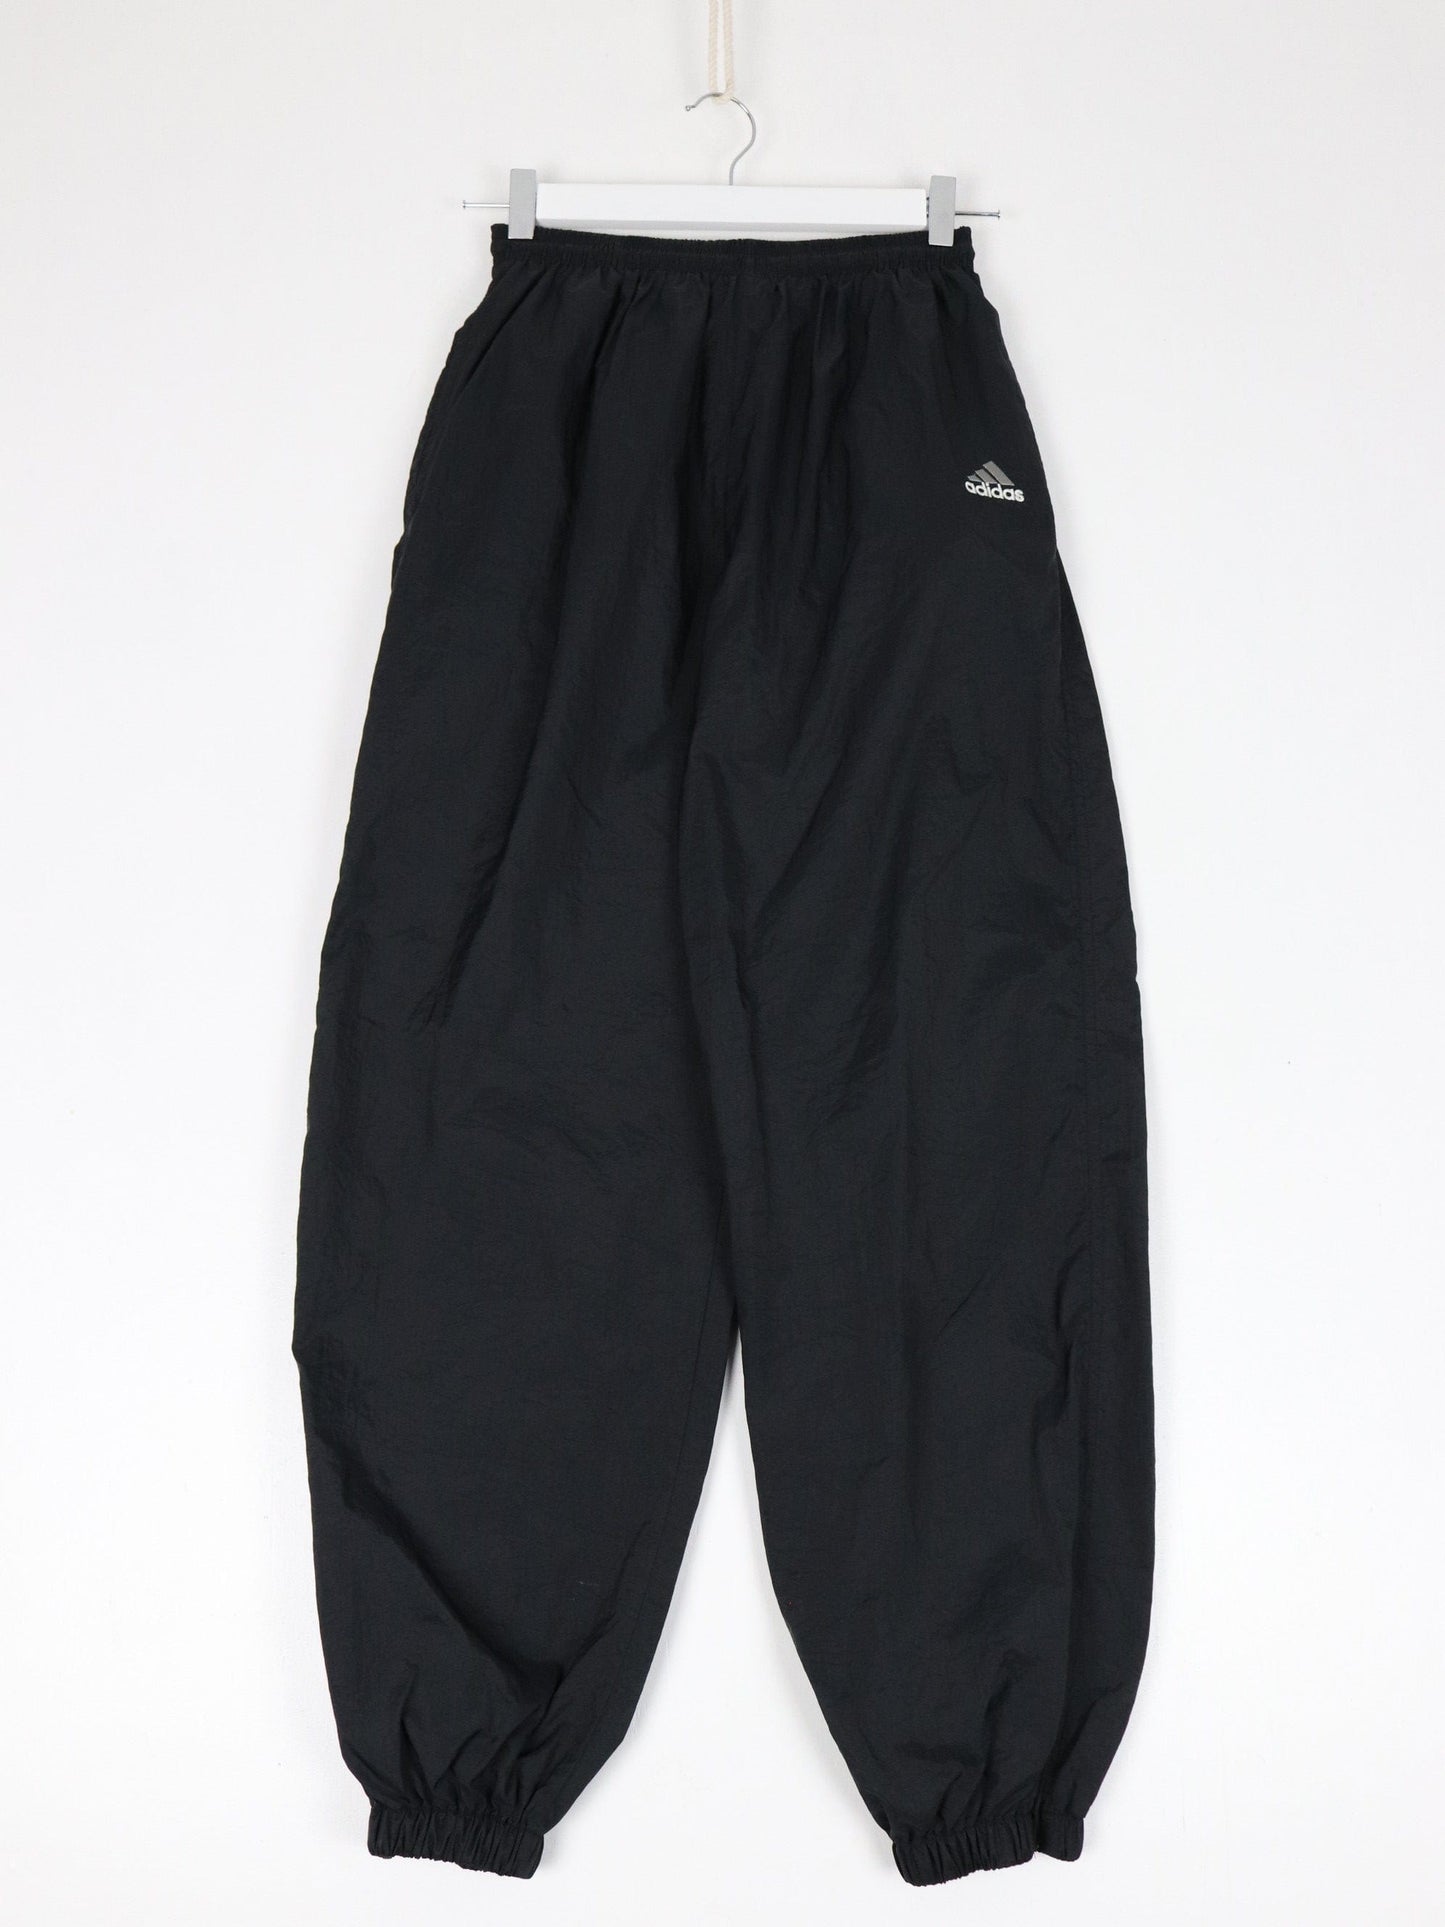 Adidas Trackpants Vintage Adidas Pants Youth XL Black Cuffed Track Athletic 90s